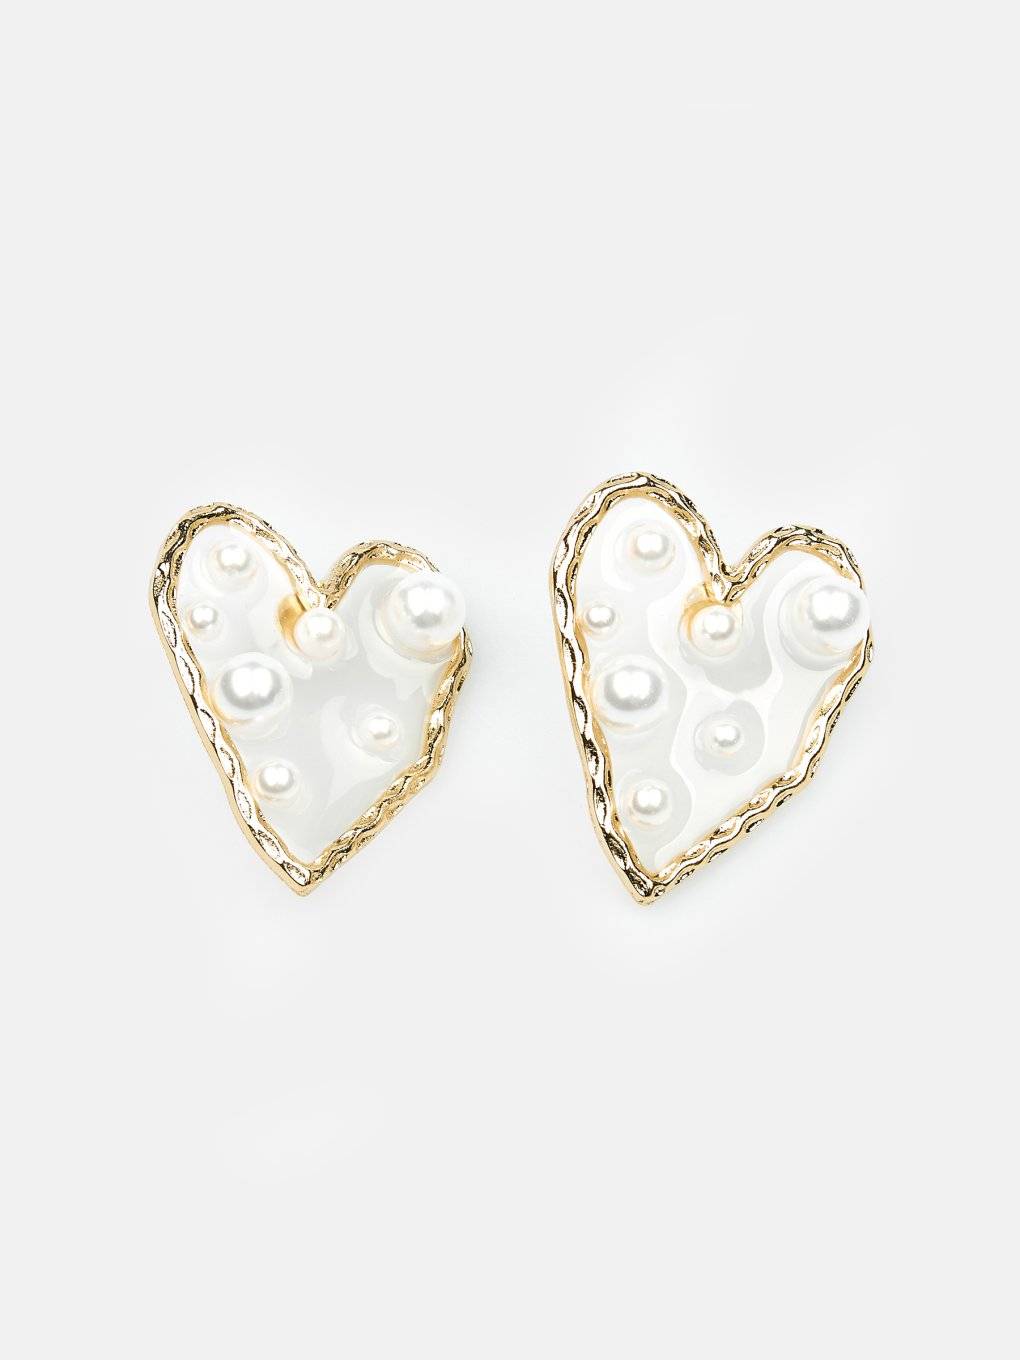 Heart shaped earrings with faux pearls